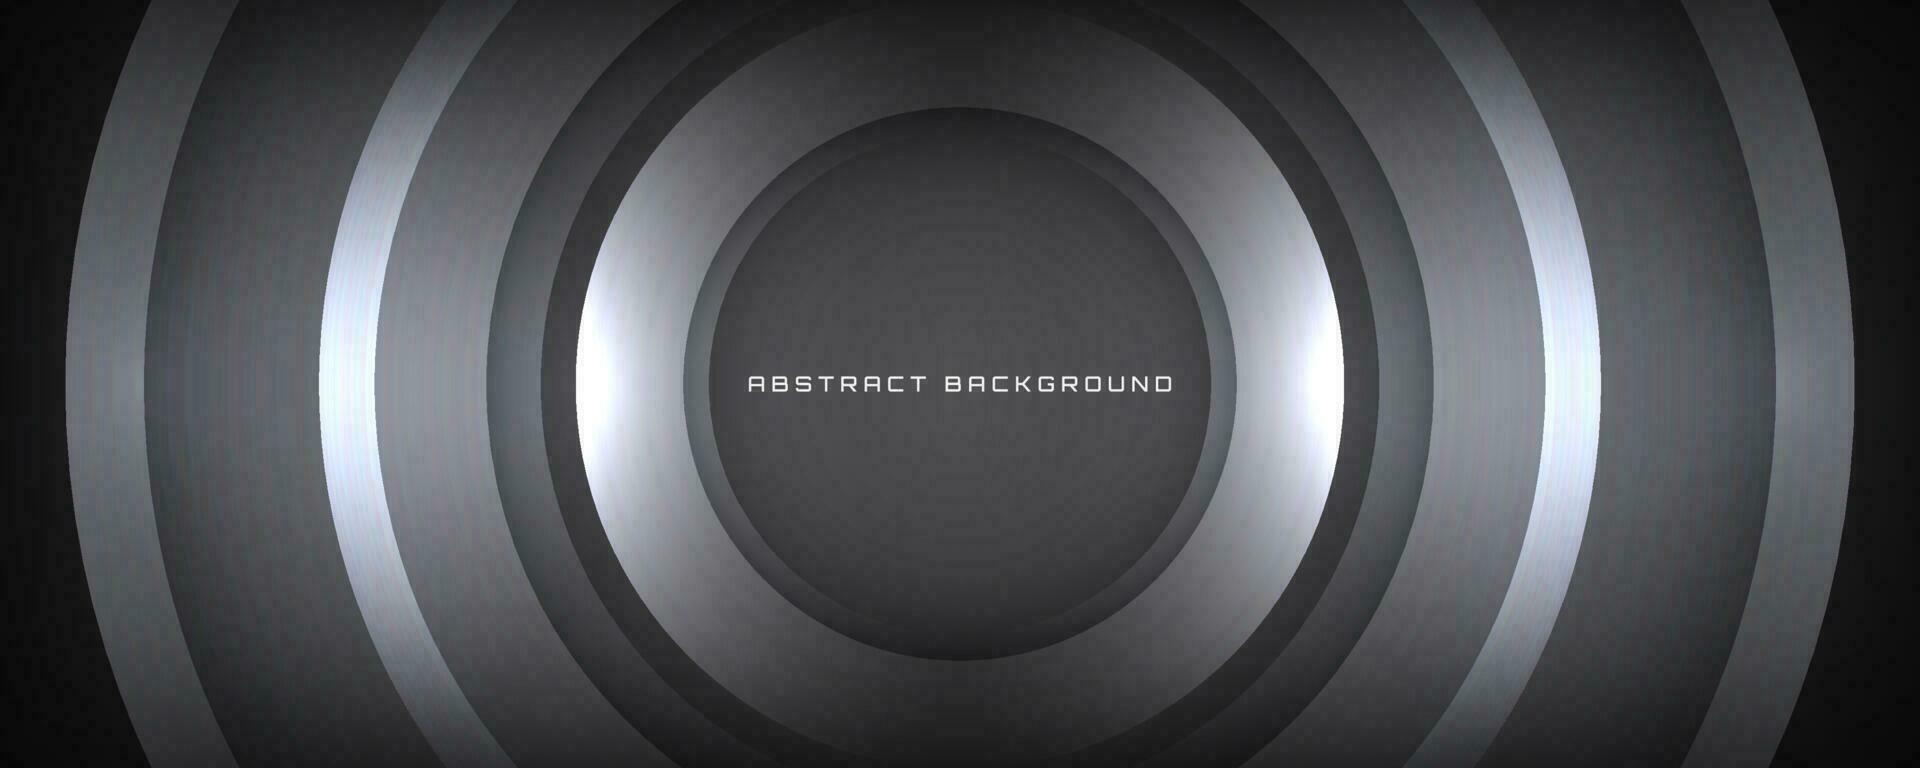 3D black white techno abstract background overlap layer on dark space with glowing circles decoration. Modern graphic design element cutout style concept for banner, flyer, card, or brochure cover vector